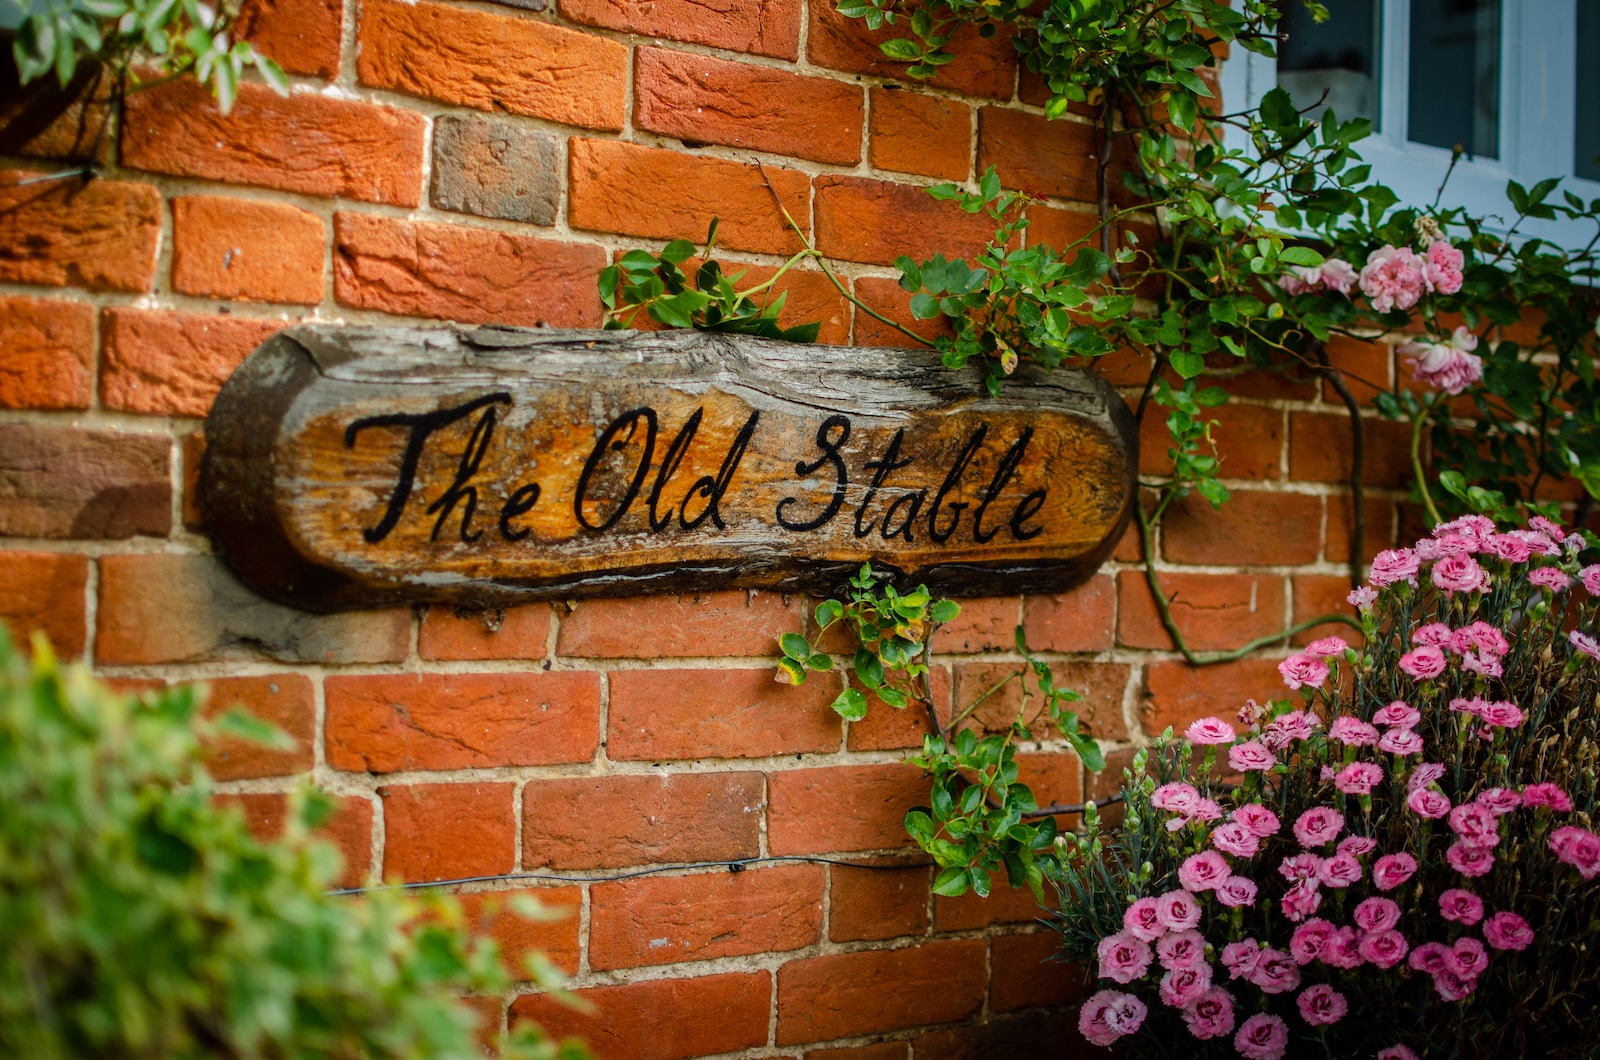 the old stable signage near pink flowers